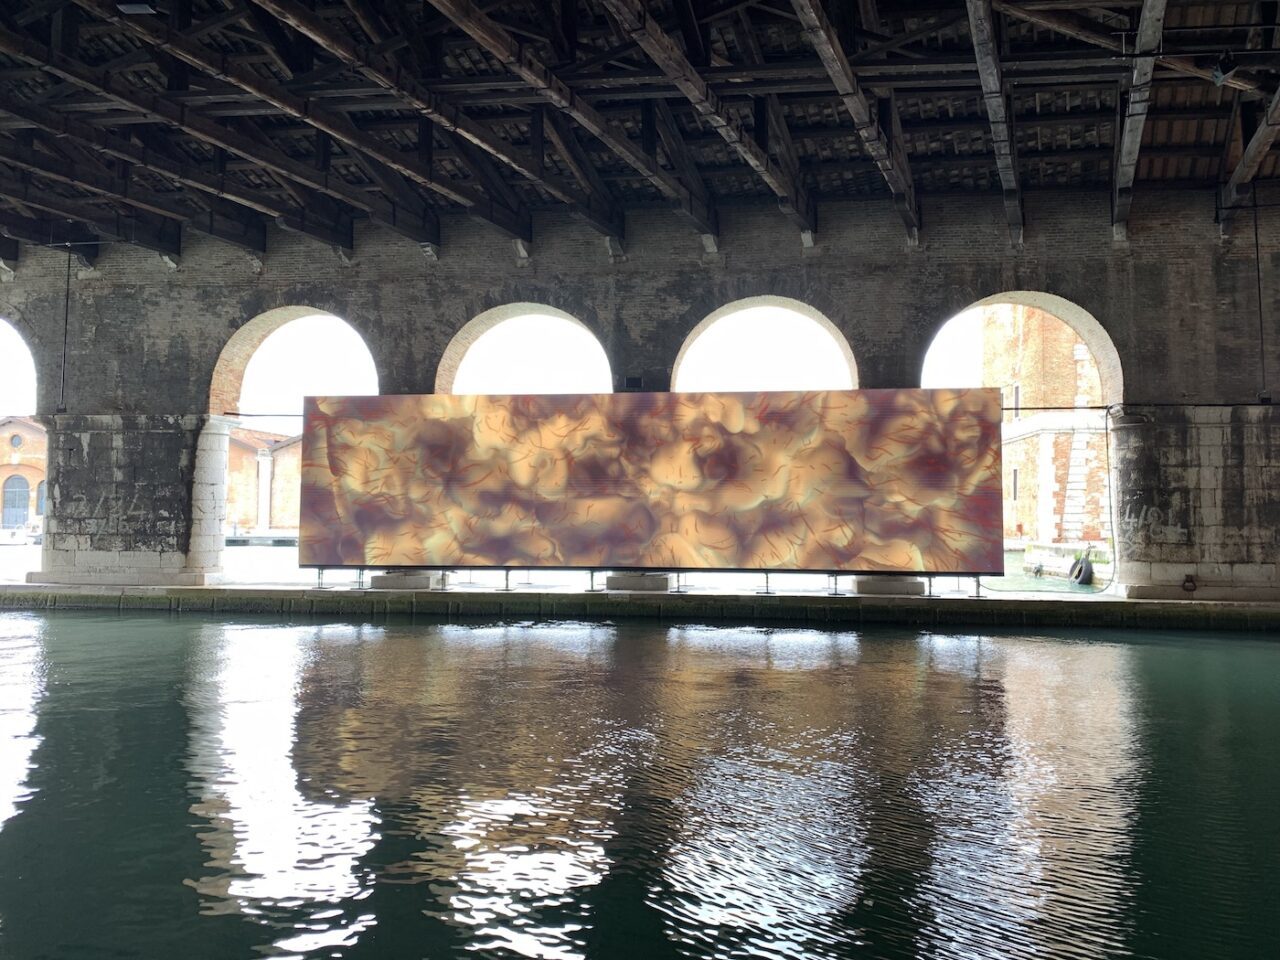 Wu Tsang, Of Whales, 2022. Installation View of “The Milk of Dreams” at Arsenale. Photo: C&